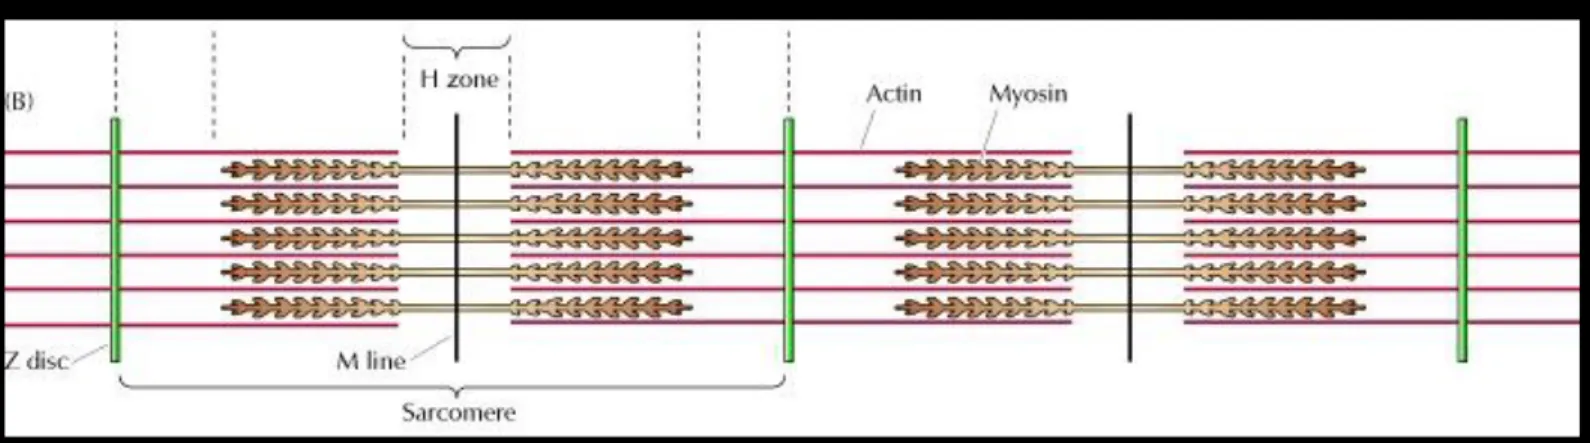 Diagram showing the organization of actin (thin) and myosin (thick) filaments in  the indicated regions.